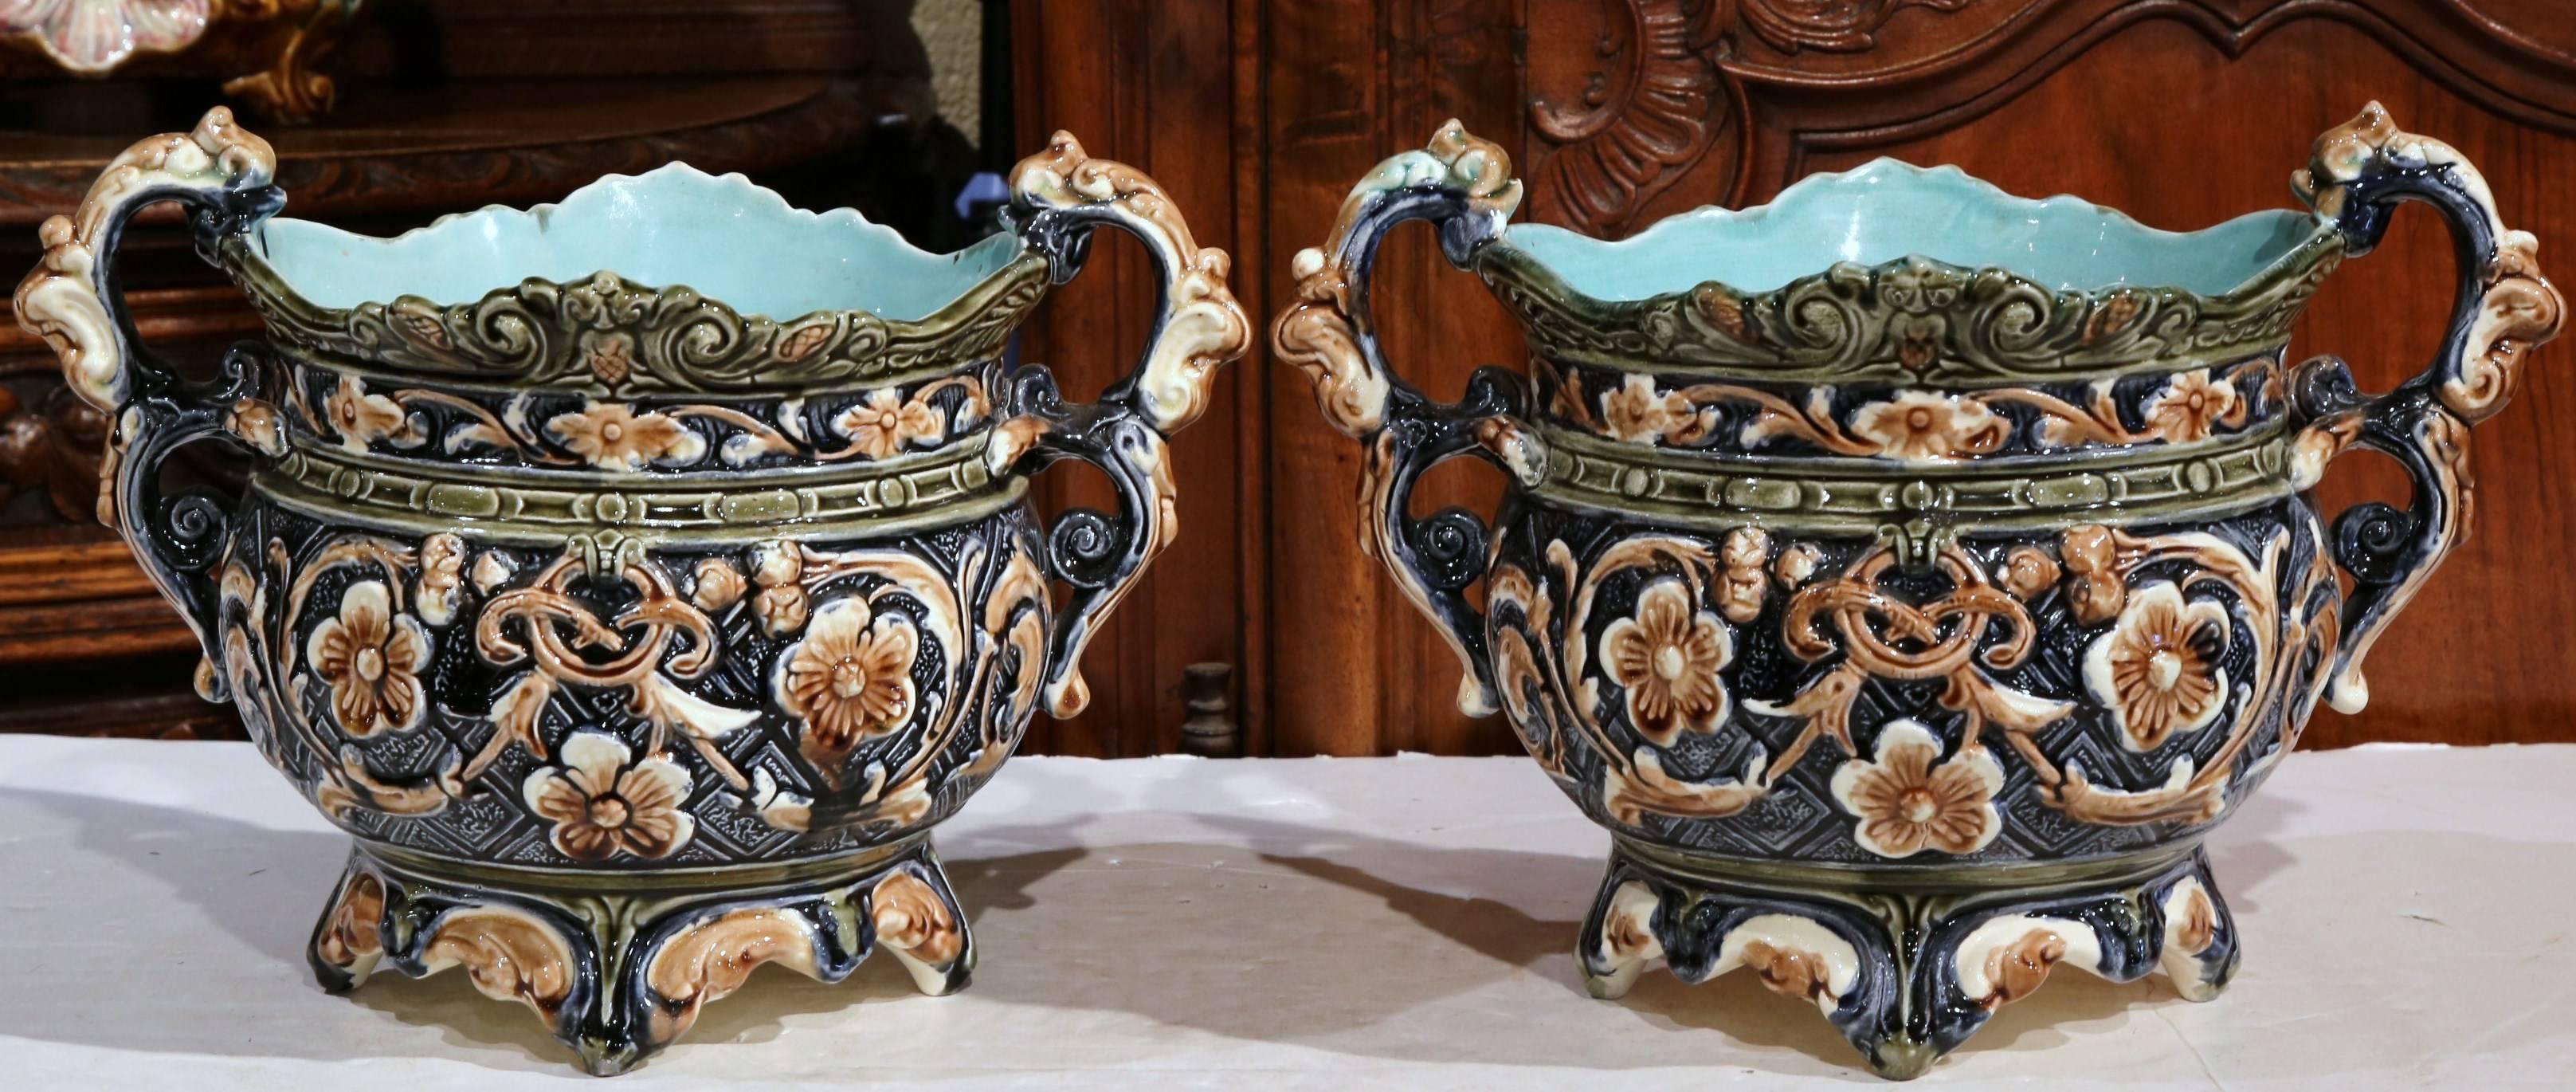 Pair of 19th Century French Hand-Painted Barbotine Cache Pots with Flower Motifs 4